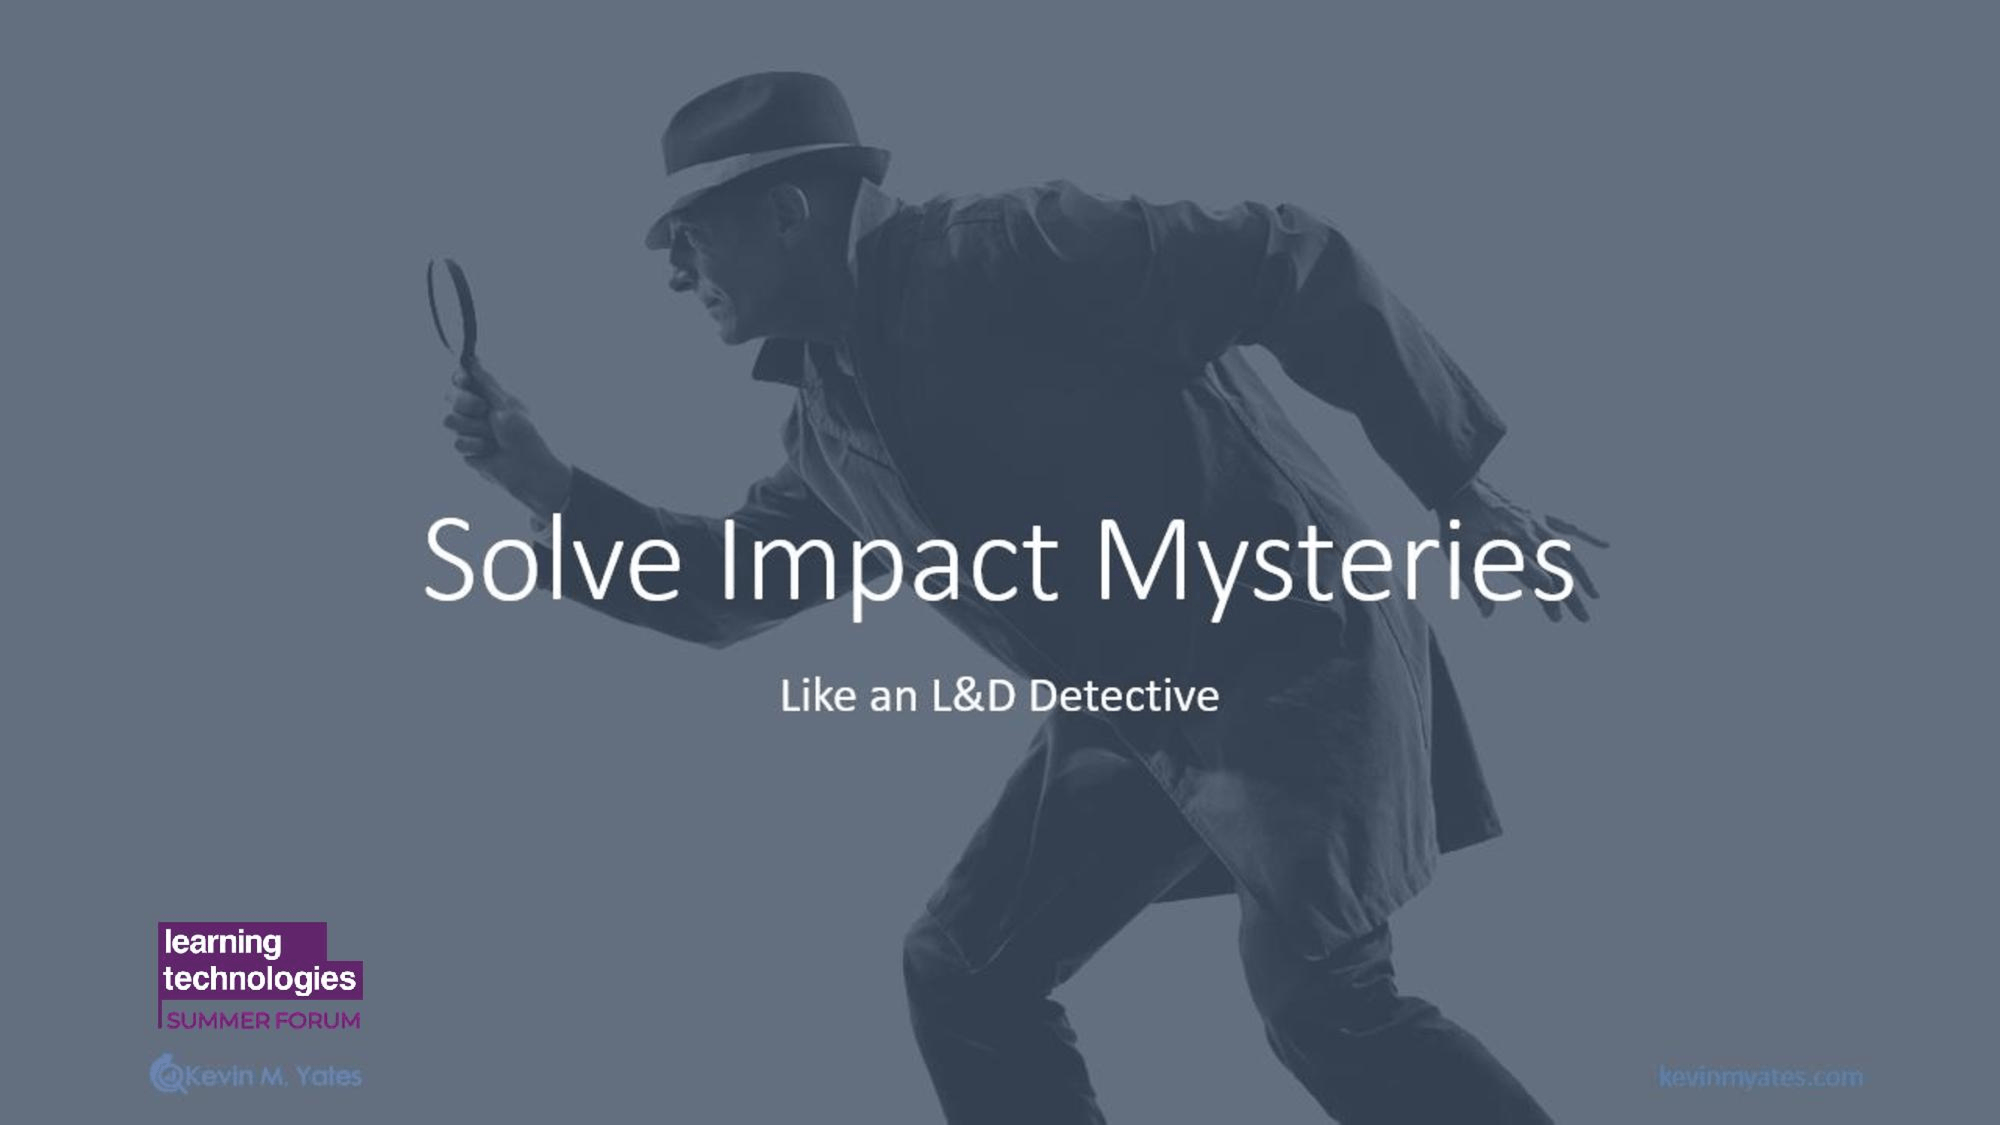 Solve impact mysteries like an L&D detective